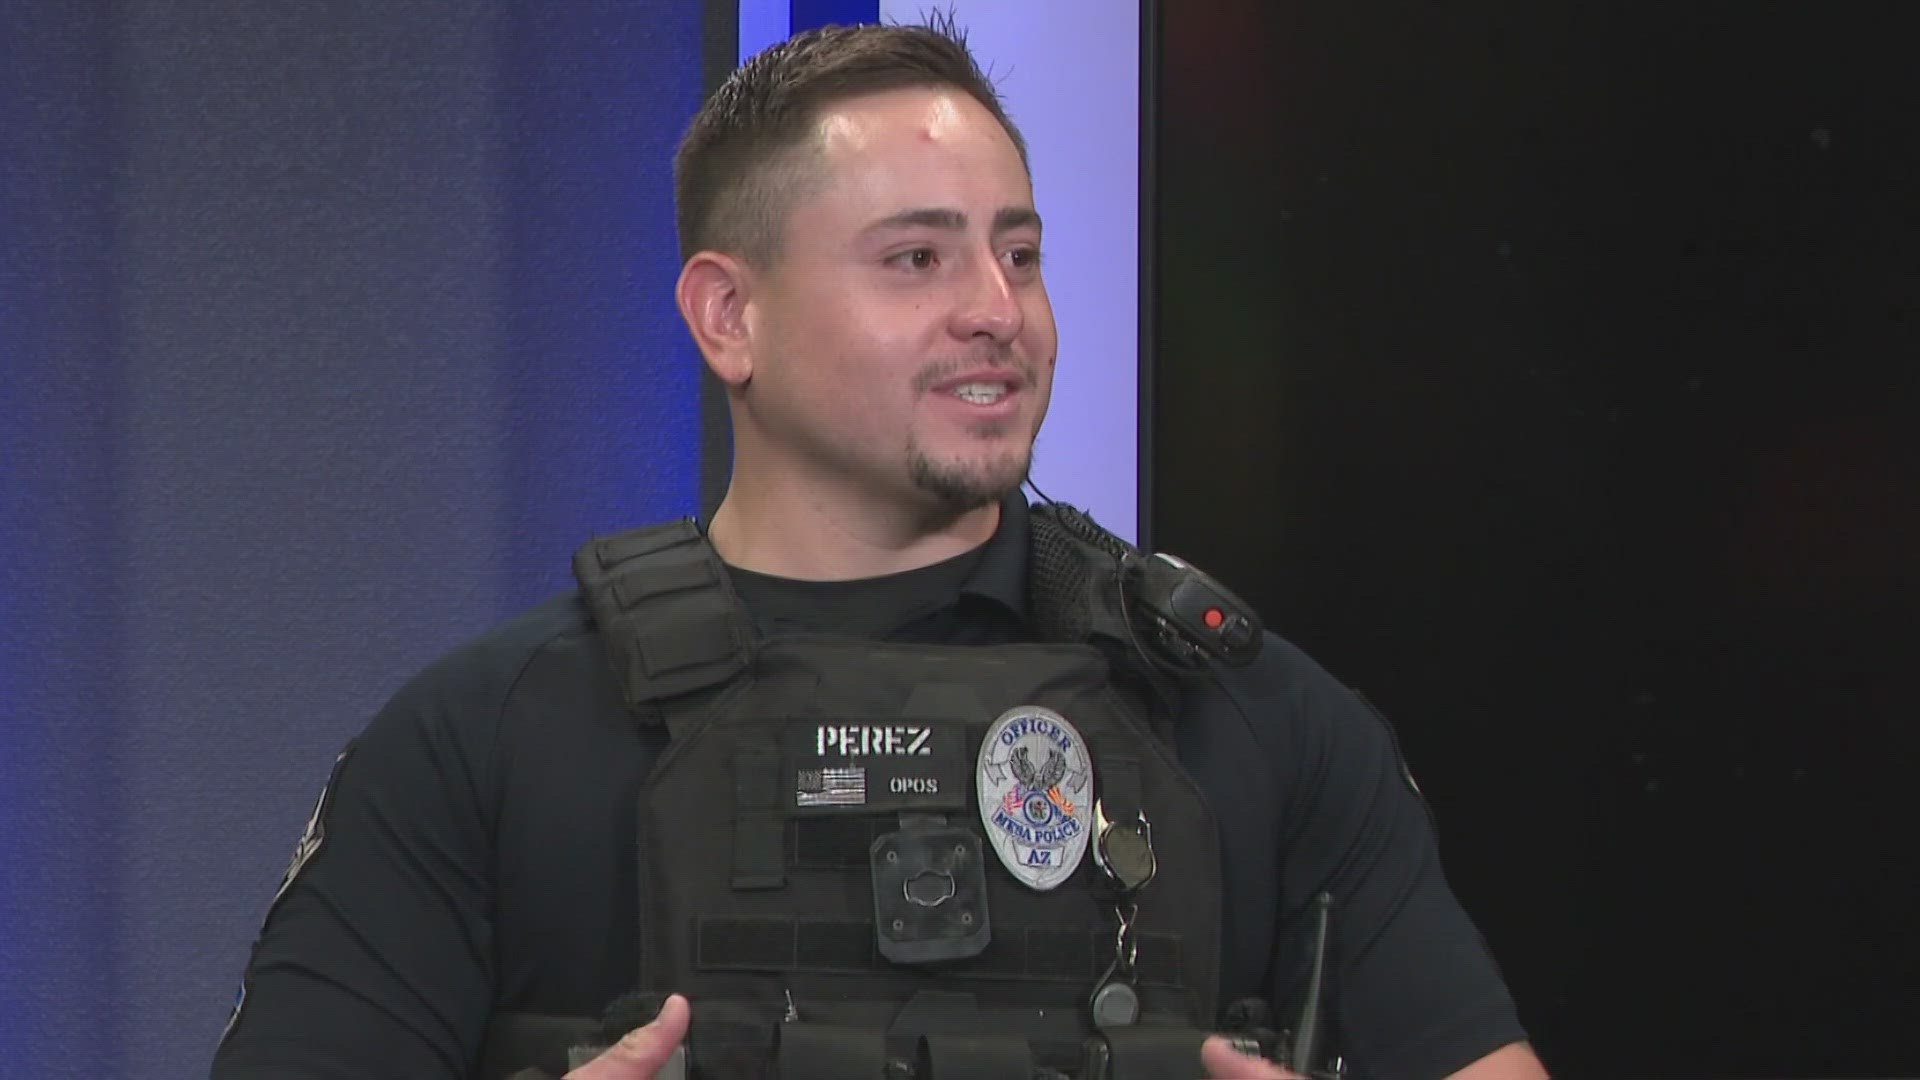 A Mesa police officer is being hailed a hero after saving a baby's life.